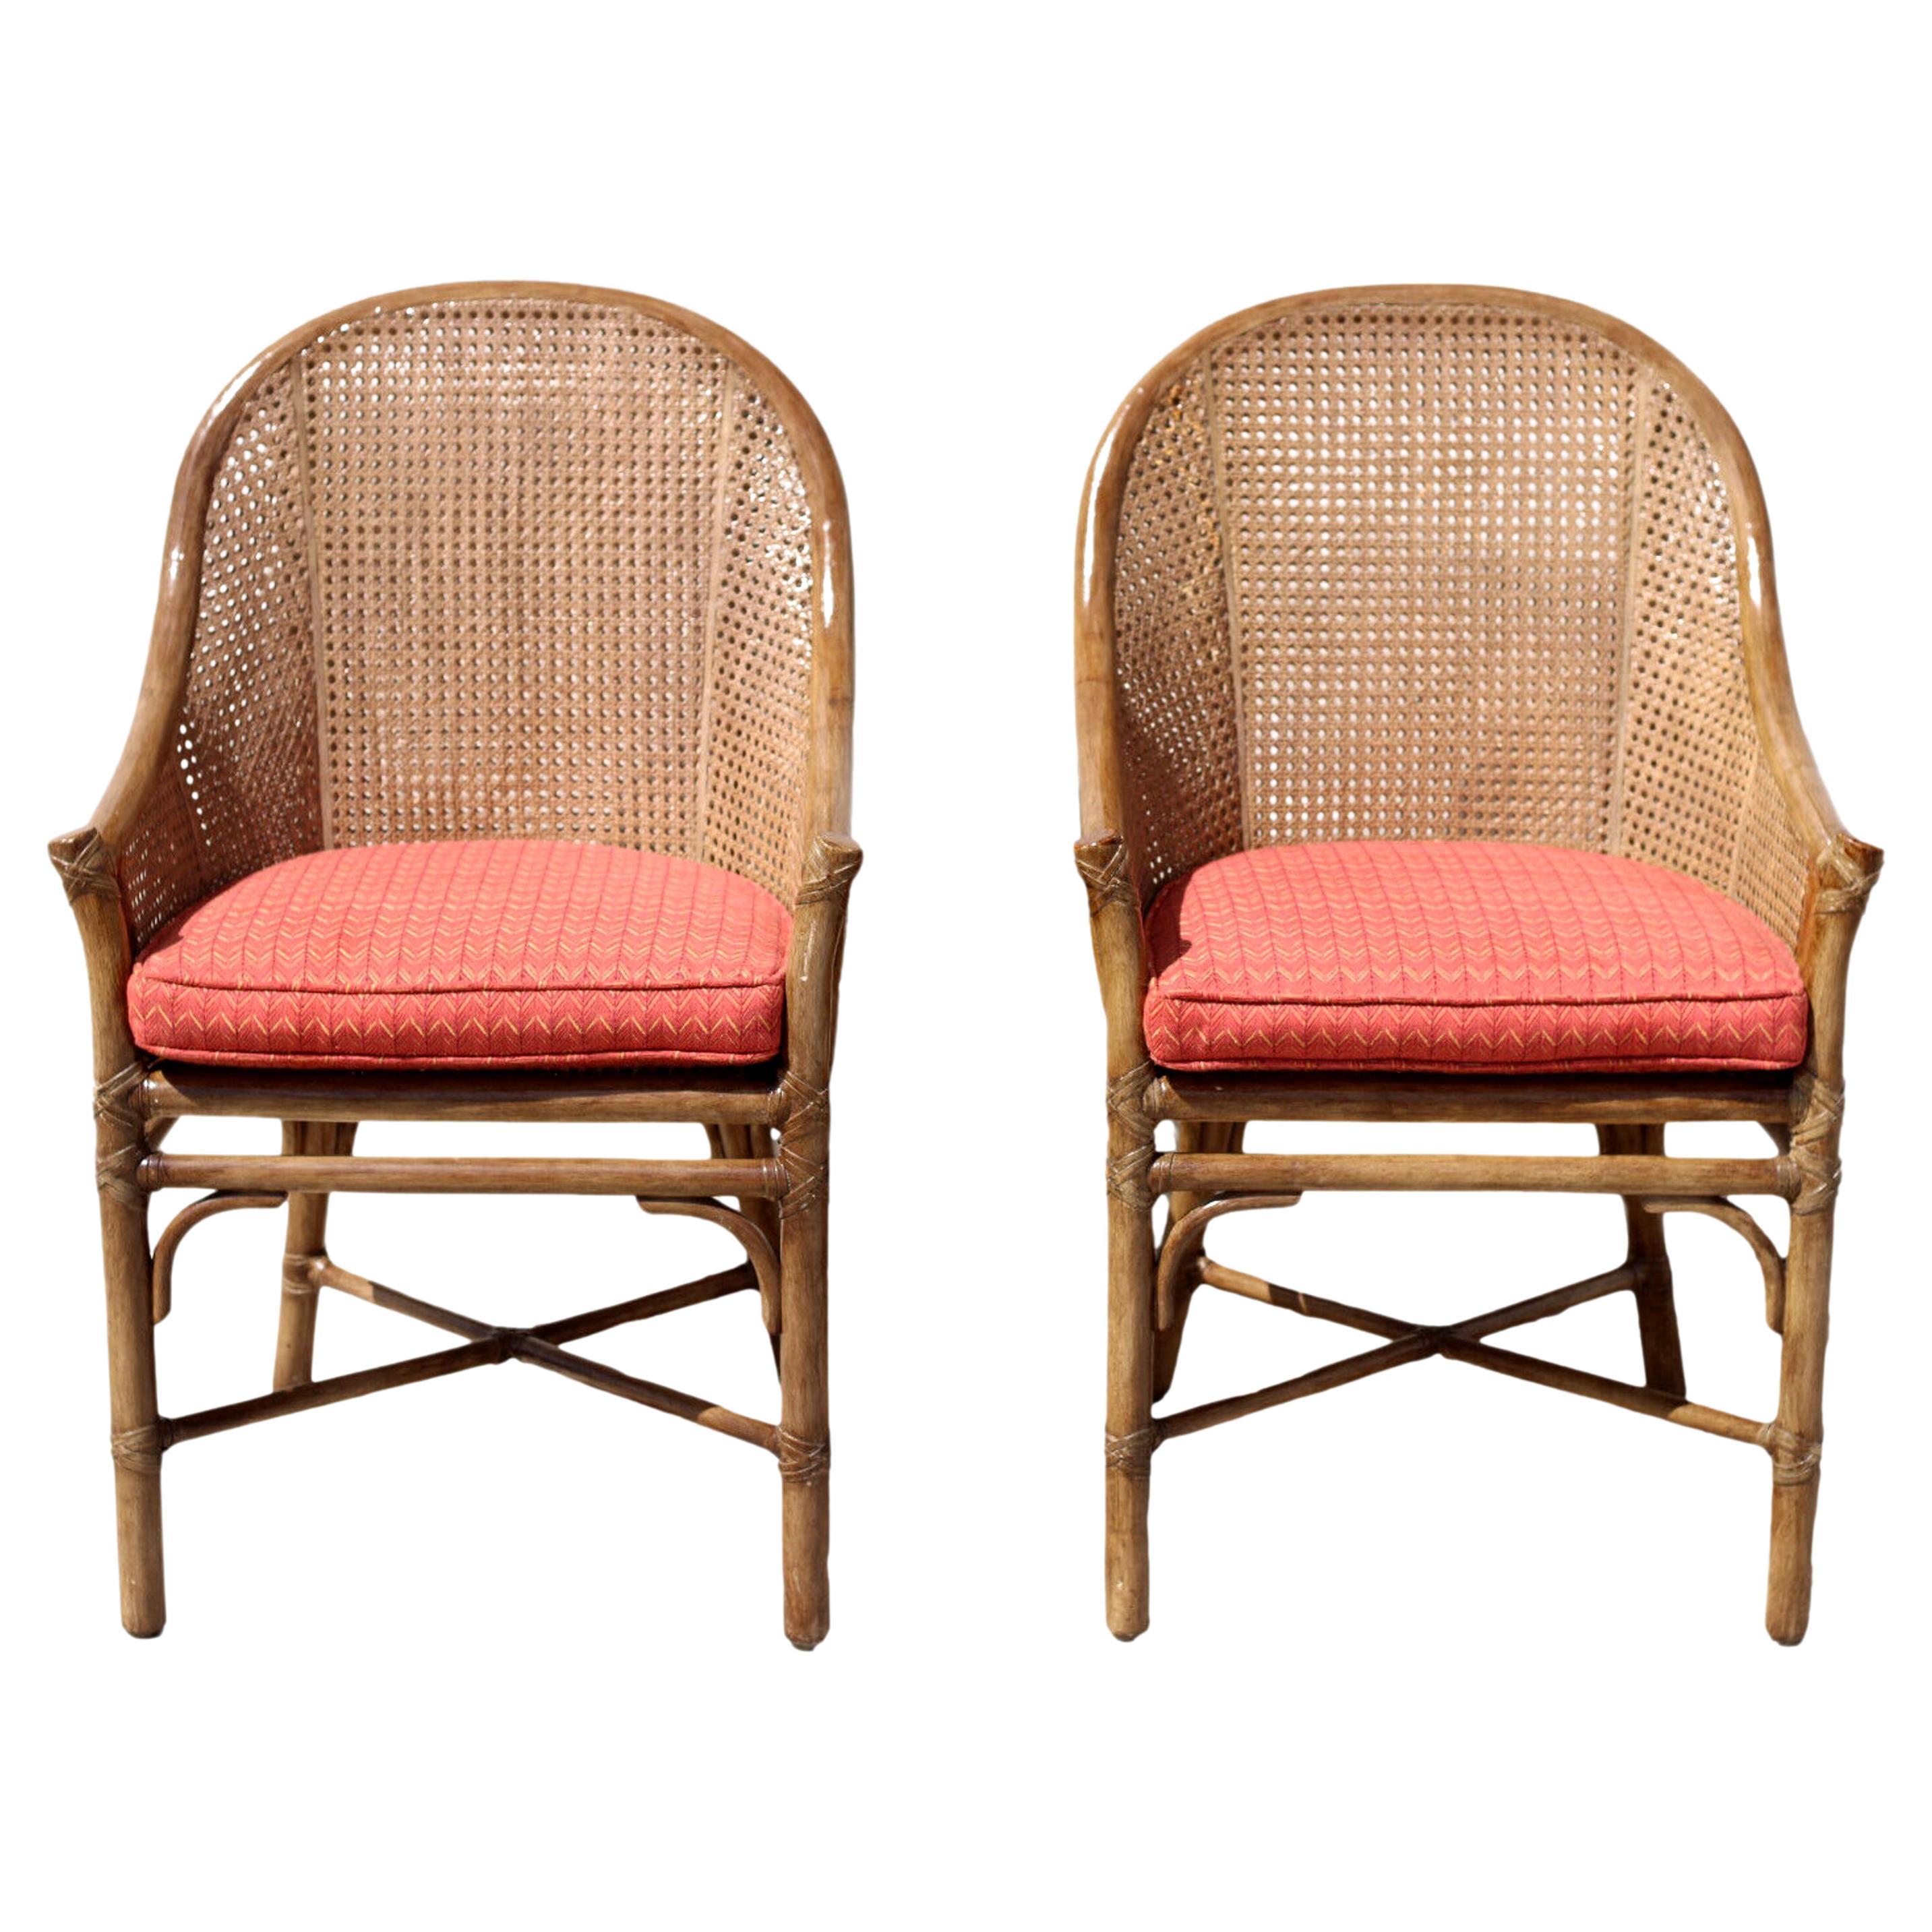 Elinor McGuire Rattan Caned Barrel Back Arm Chairs, a Pair